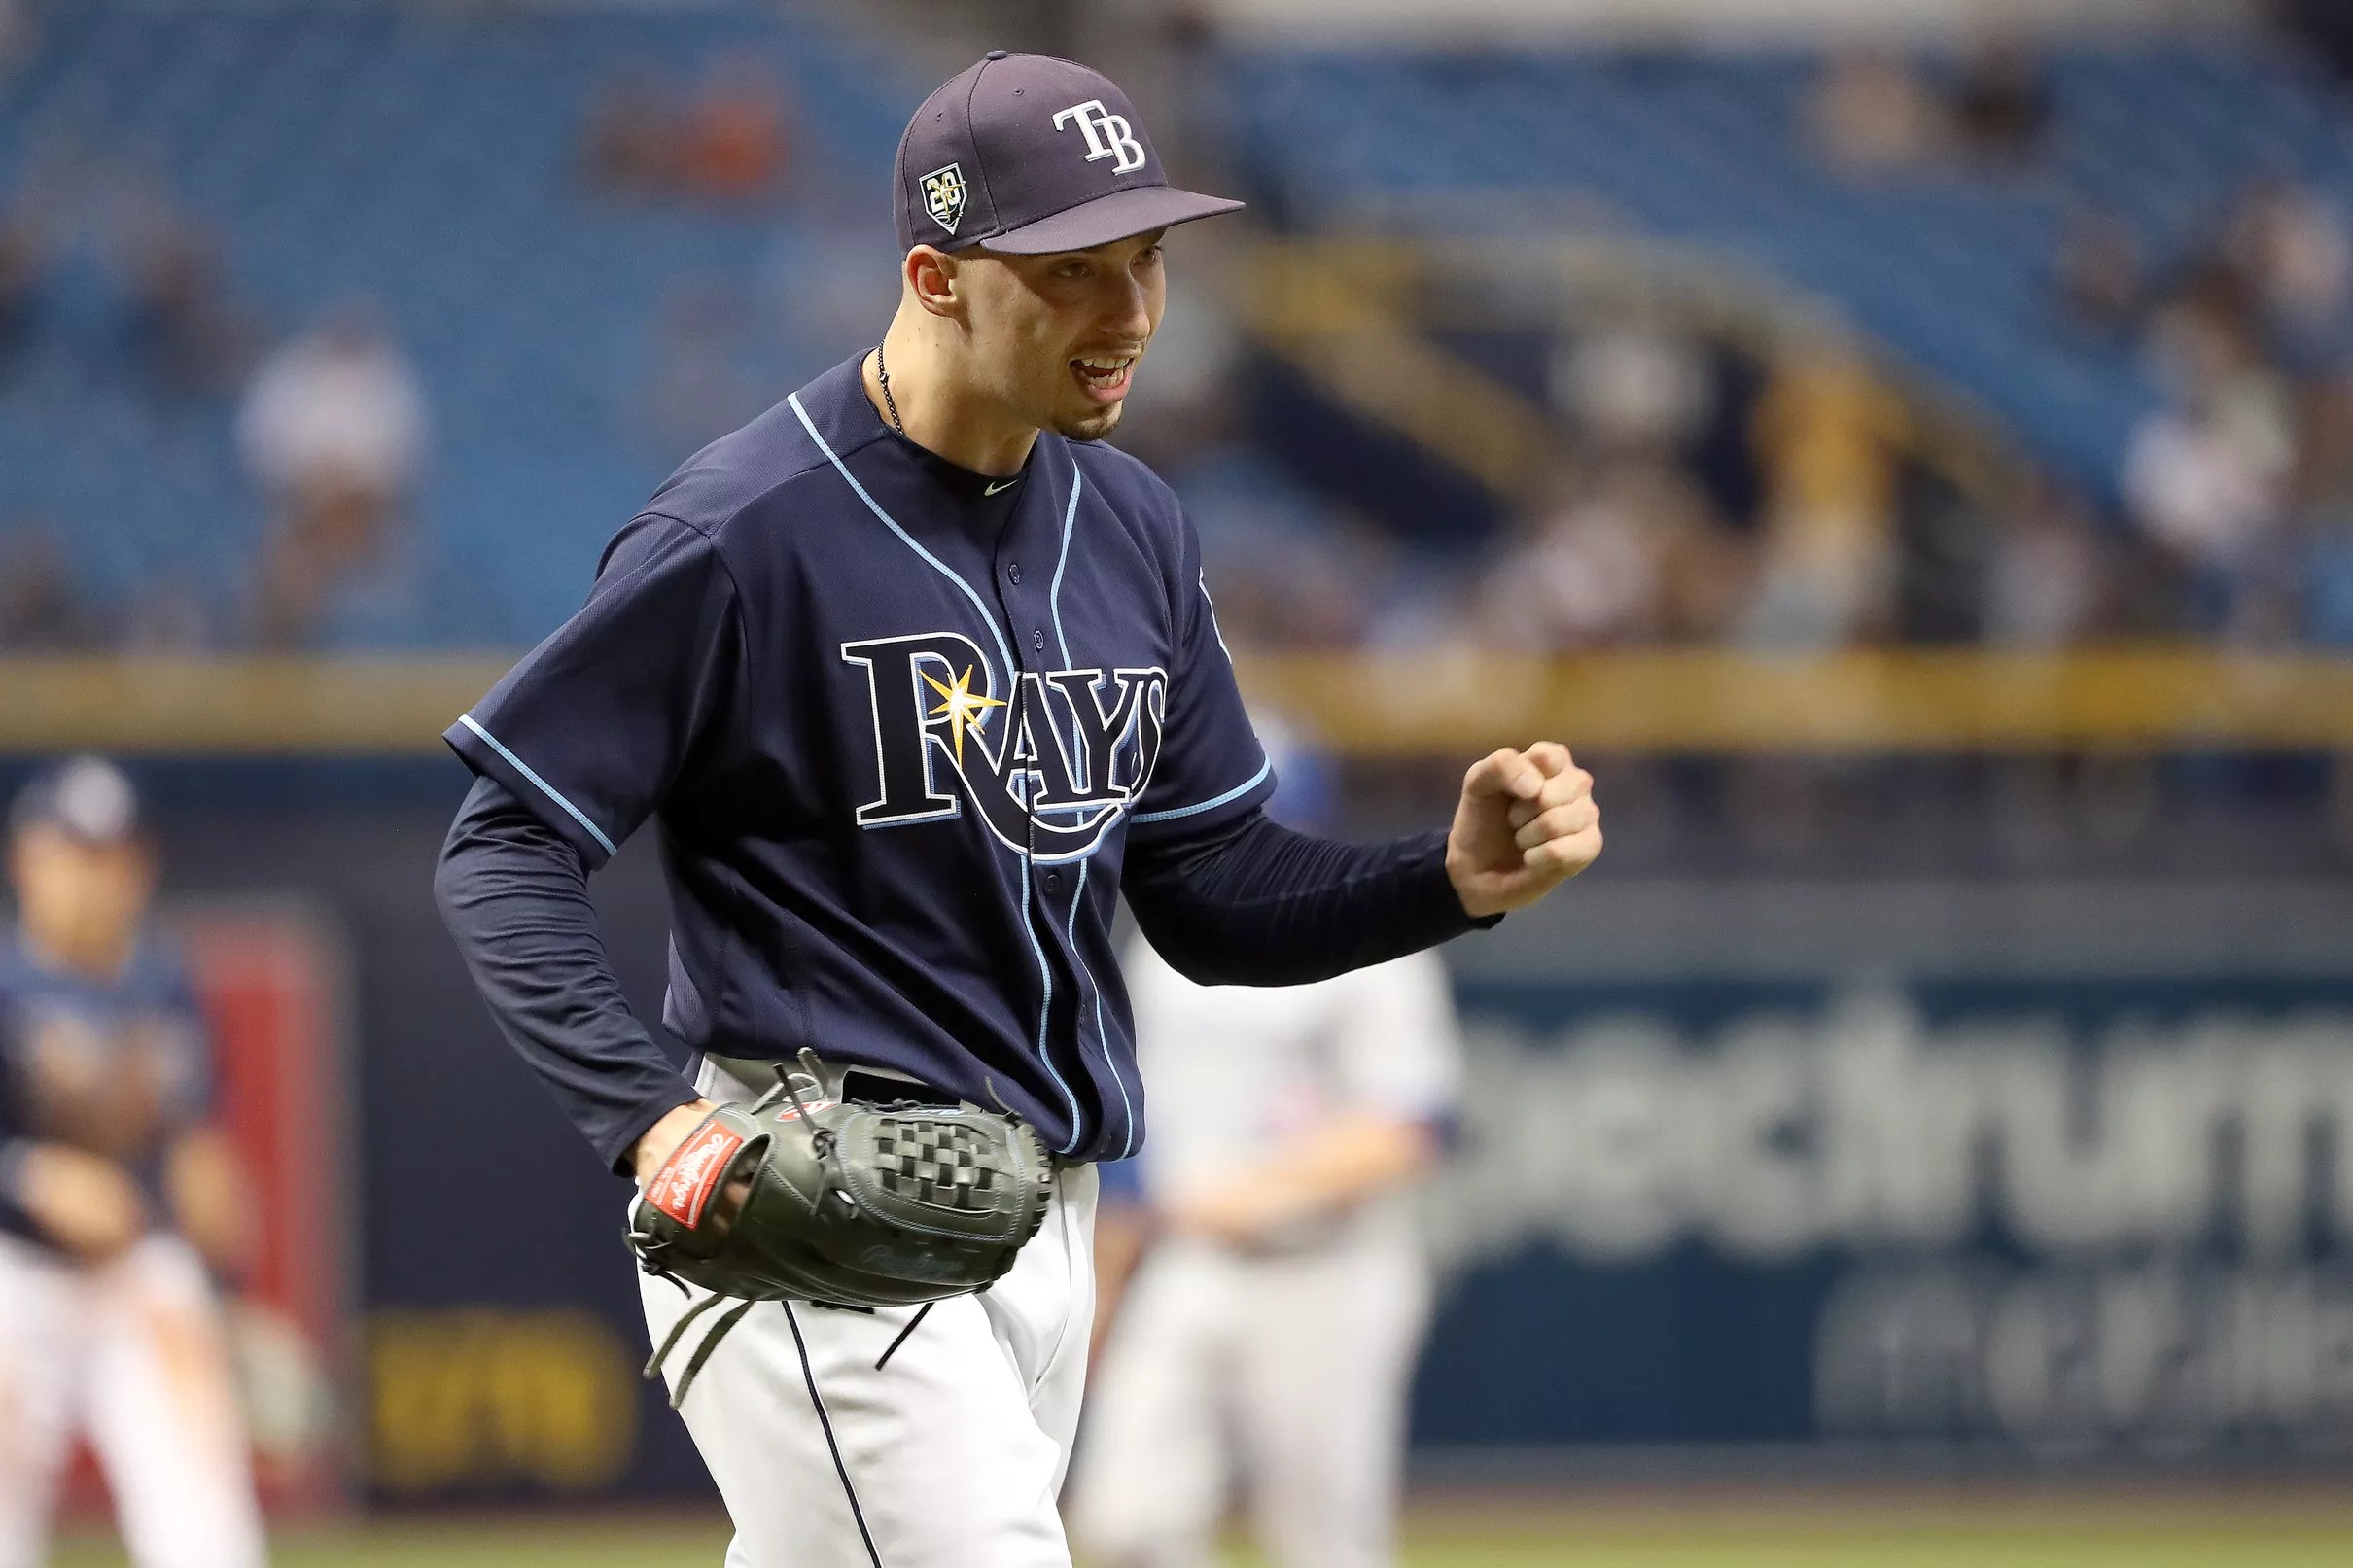 Blake Snell wins American League Cy Young award